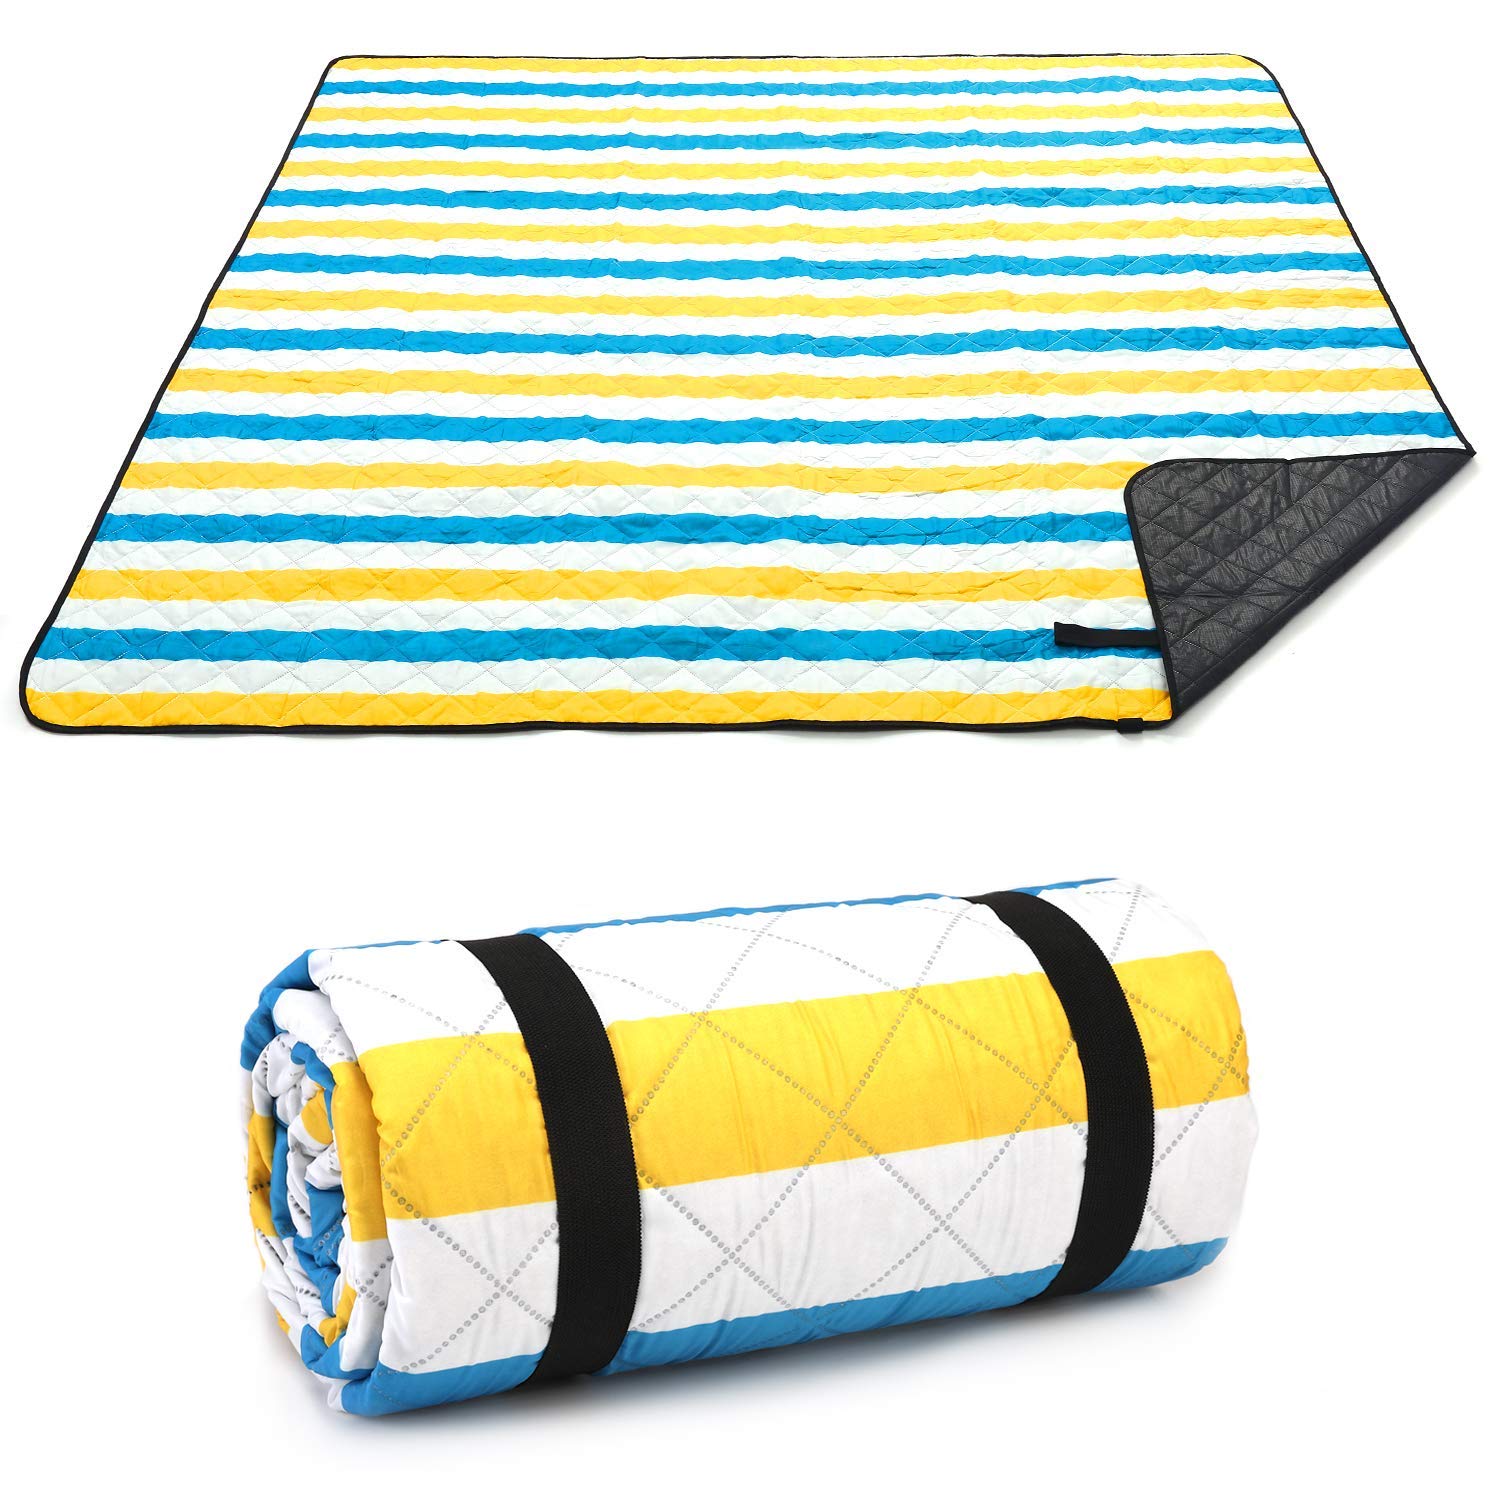 Machine Wash Portable HOdo Picnic Blanket Extra Large 79x79 Outdoor Blanket with Waterproof PEVA Backing and Sandproof Front Accommodate 4-6 people,Camping Mat for Beach Easy Folding Grassland 